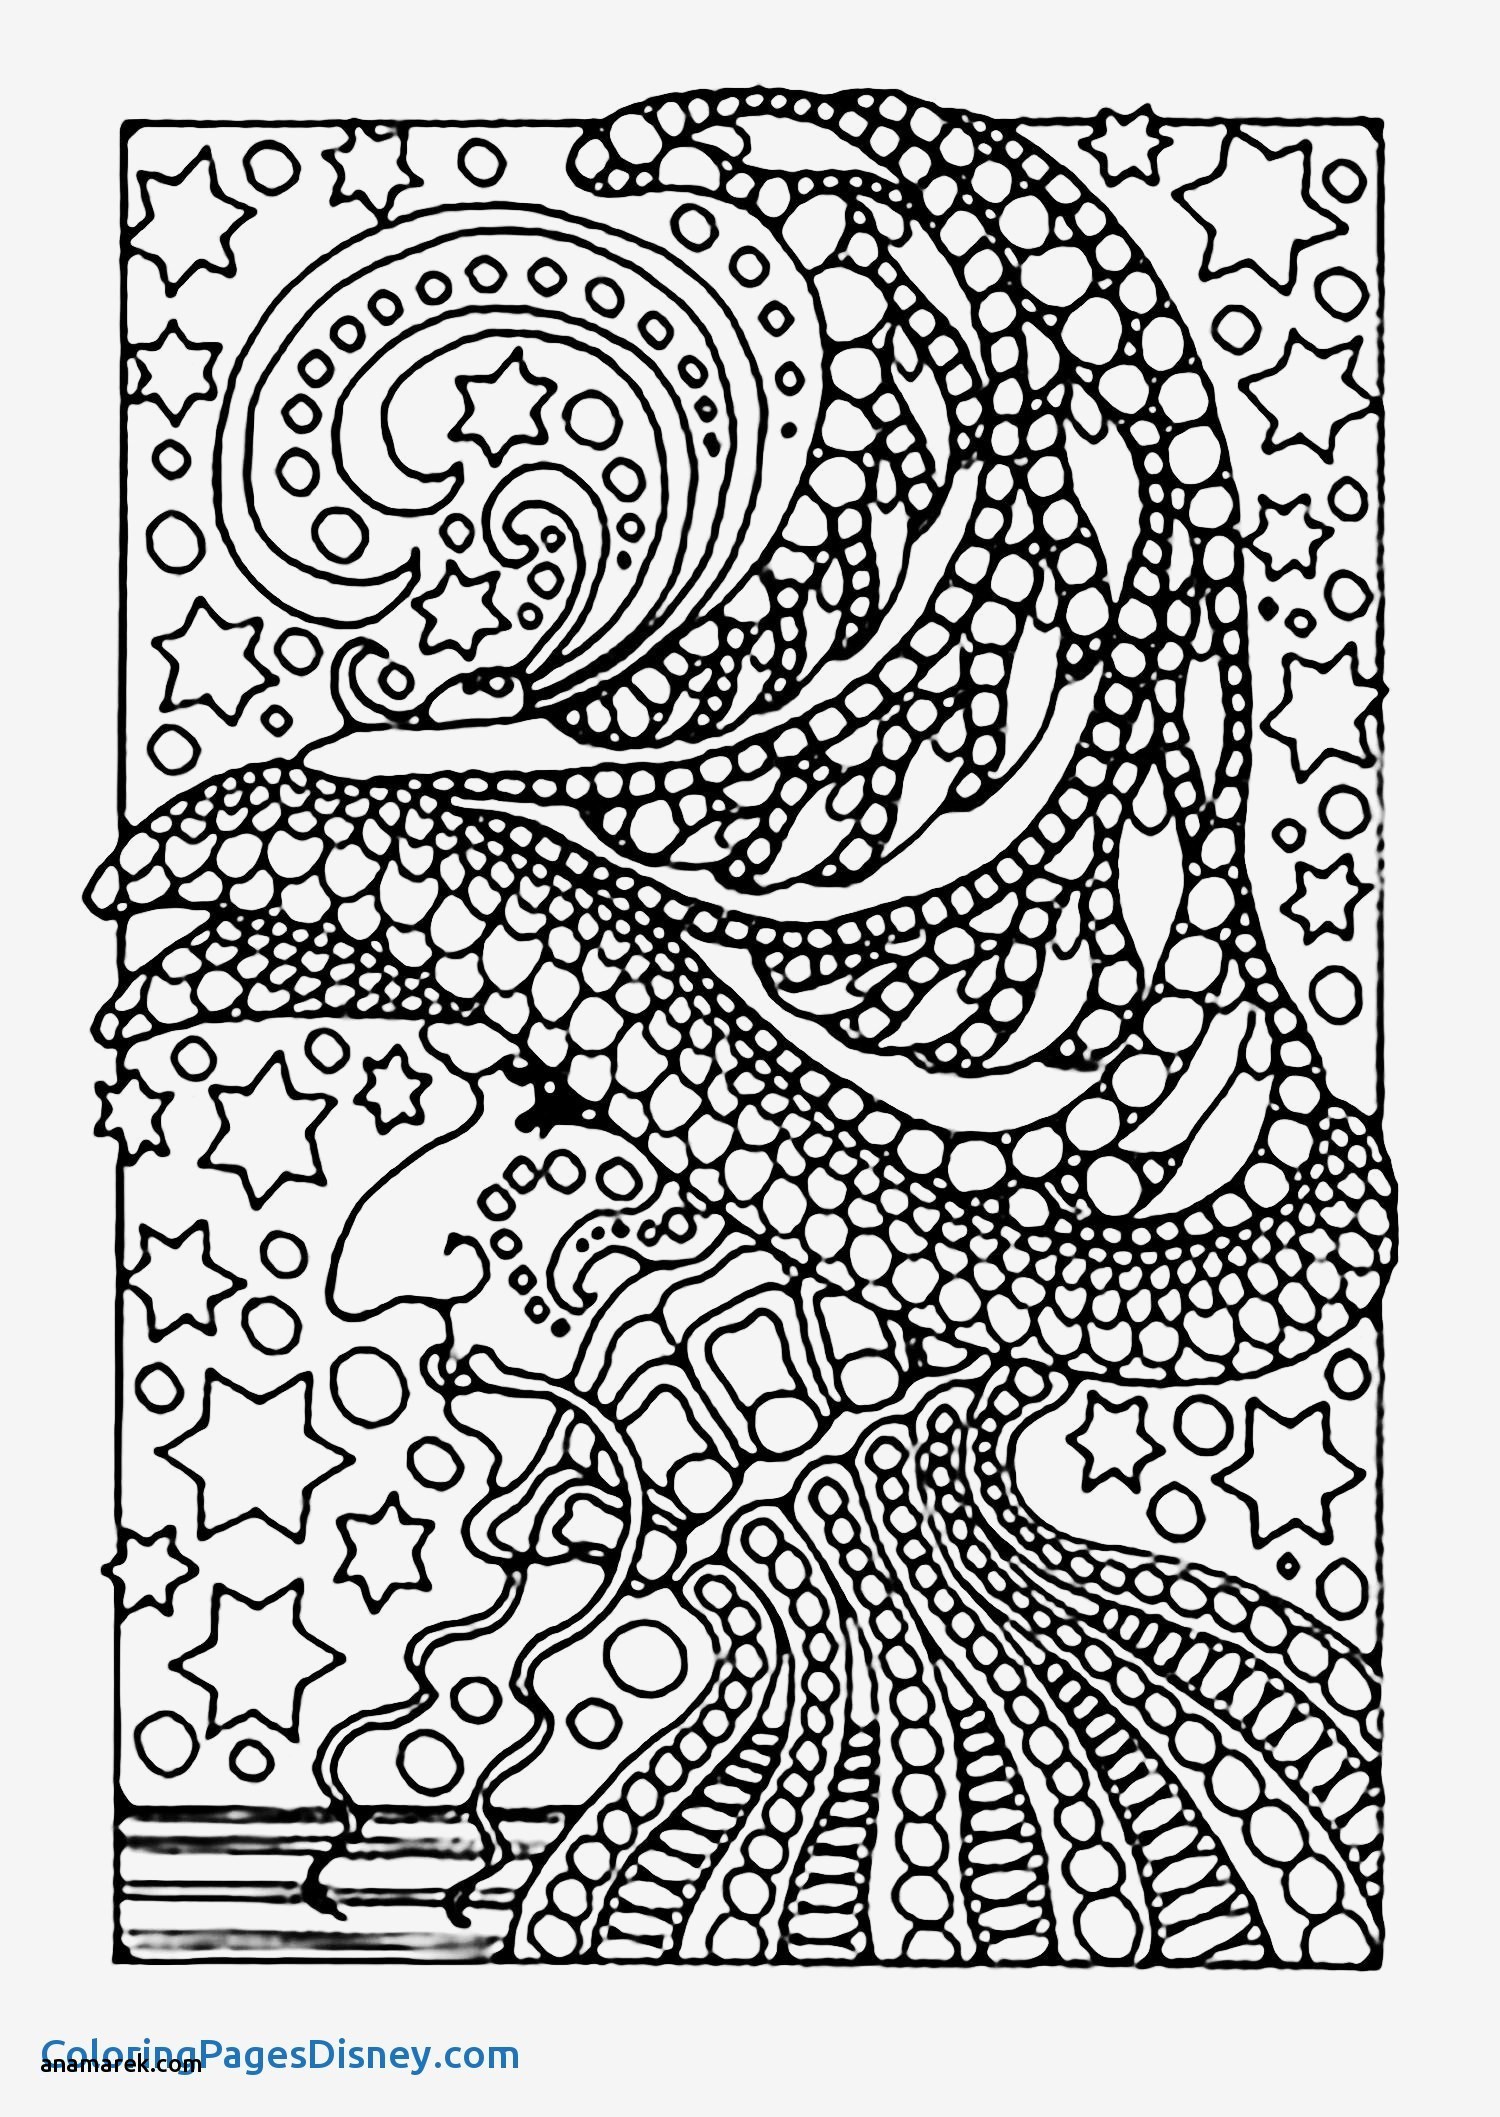 Coolest Coloring Books New Trolls Adult Coloring Book Coloring Page